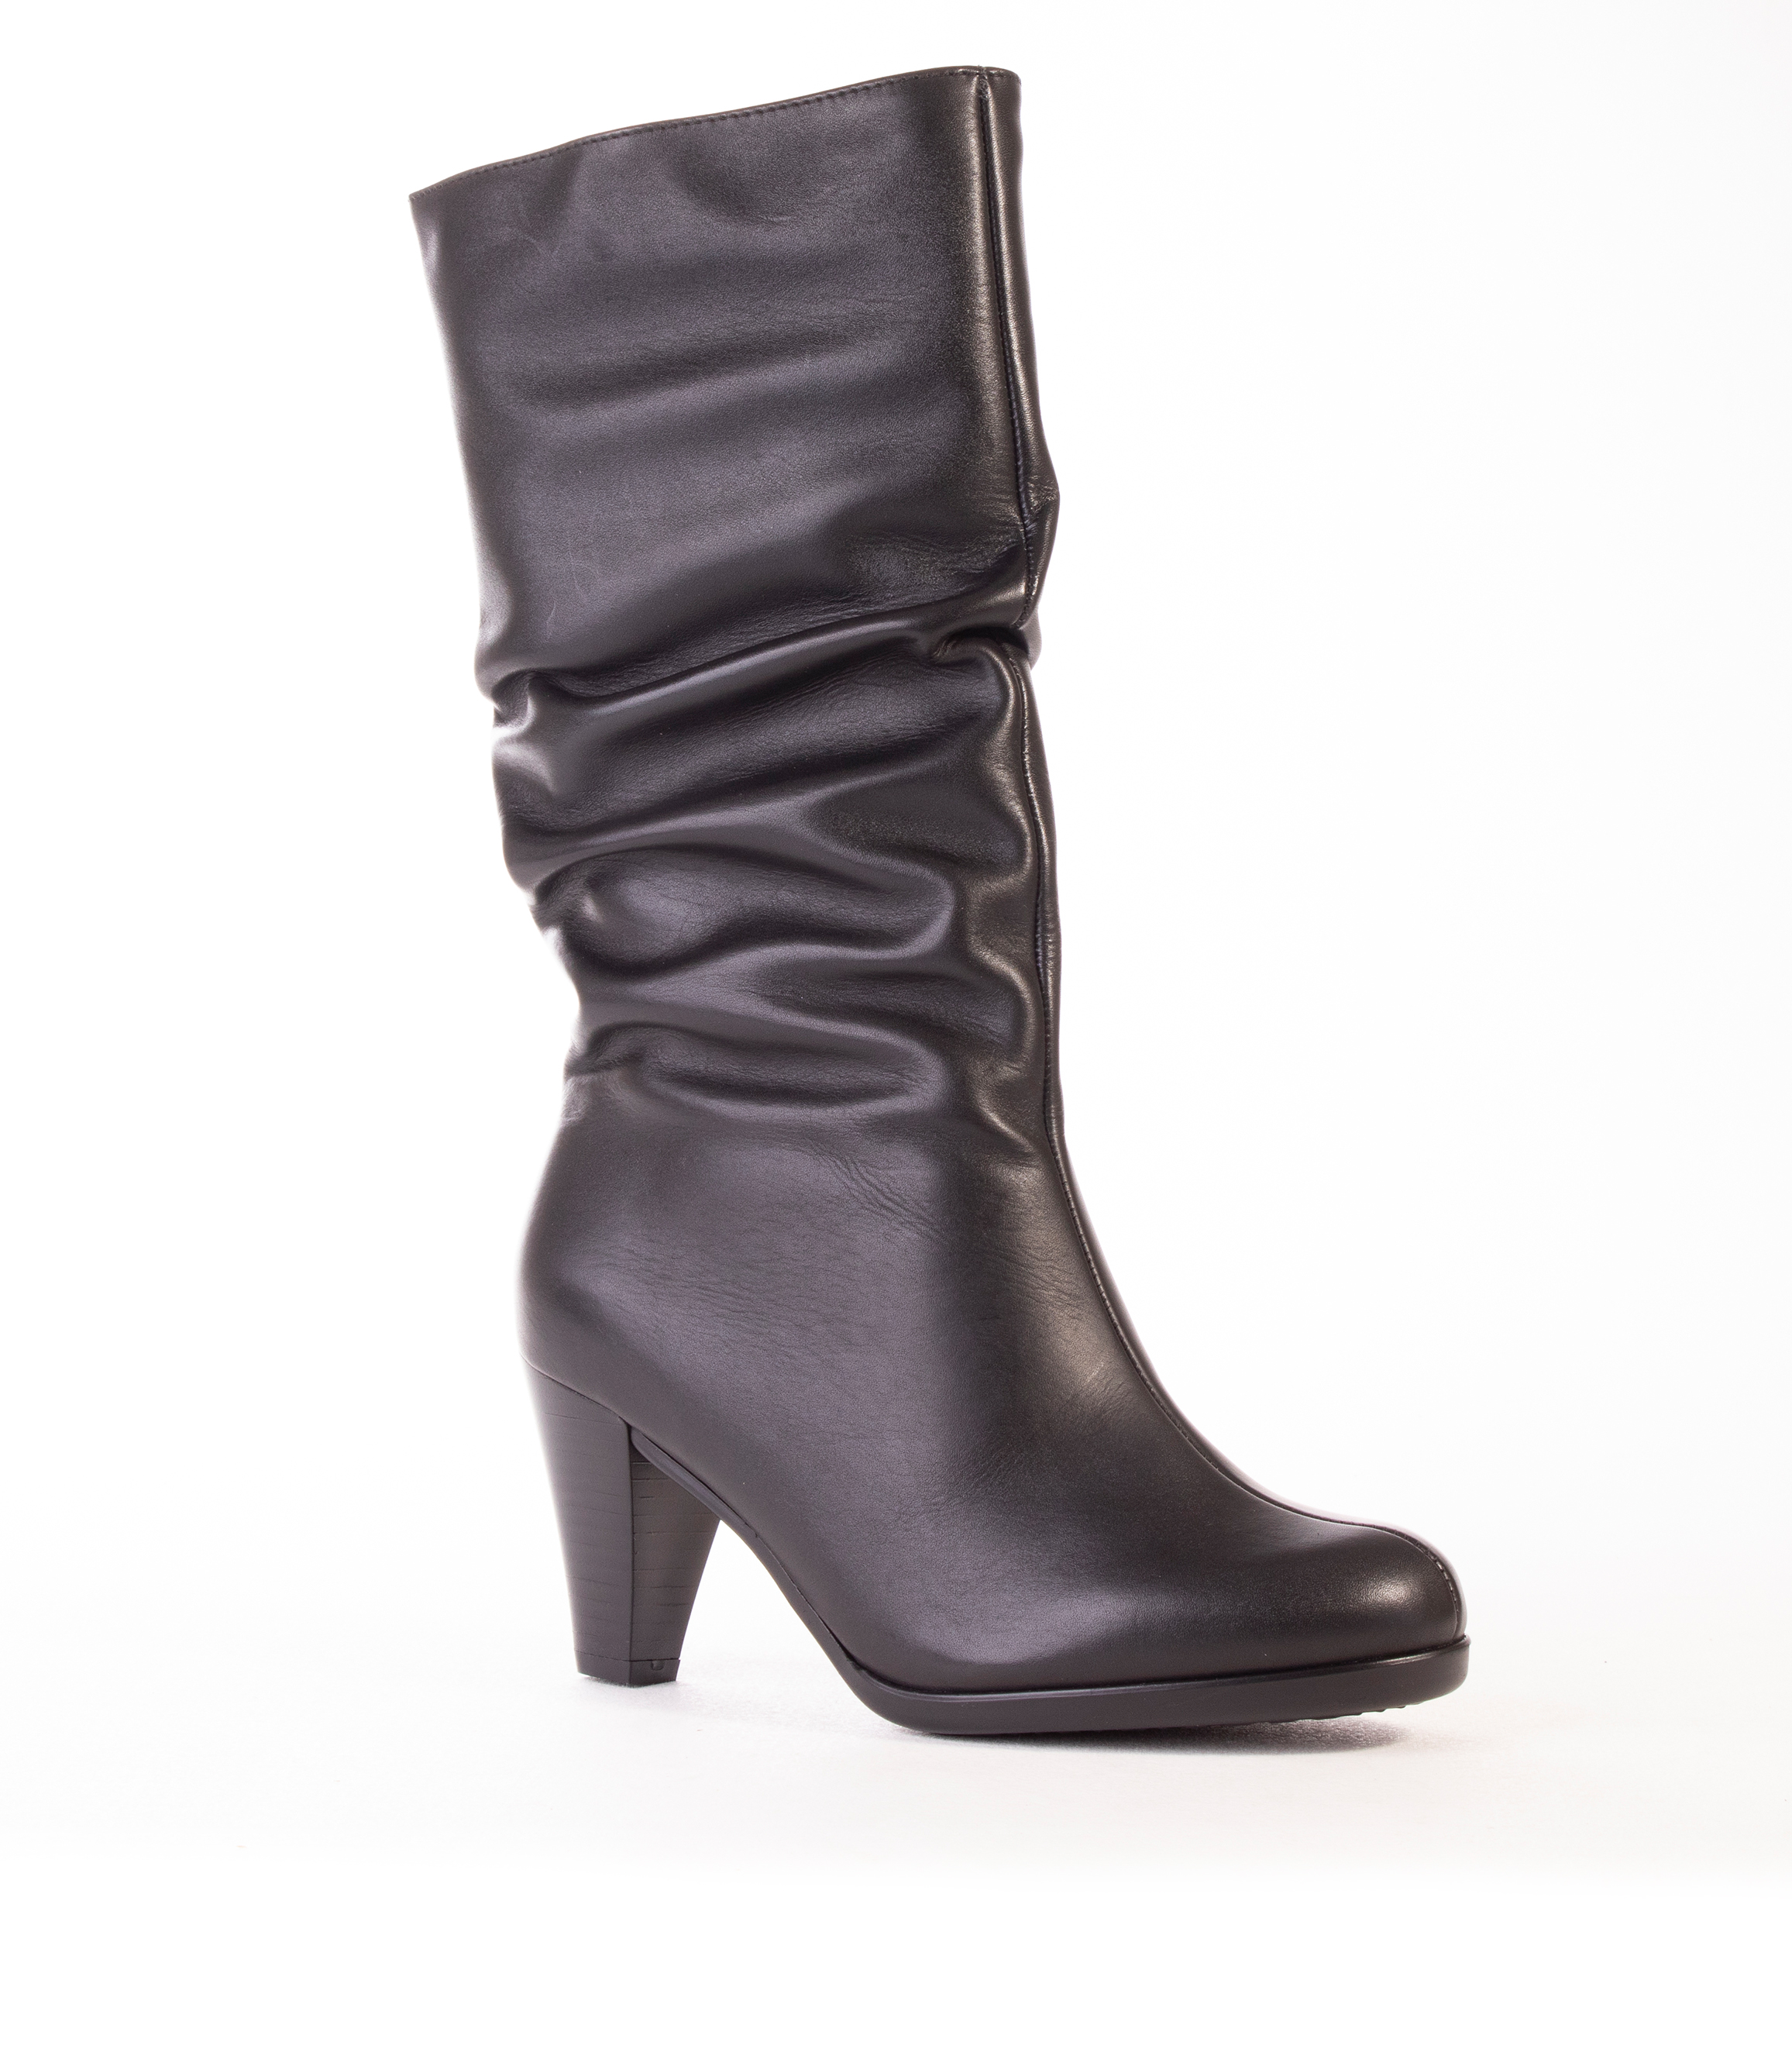 FROGGIE BLACK LEATHER RUCHED MID CALF BOOT | Rosella - Style inspired ...